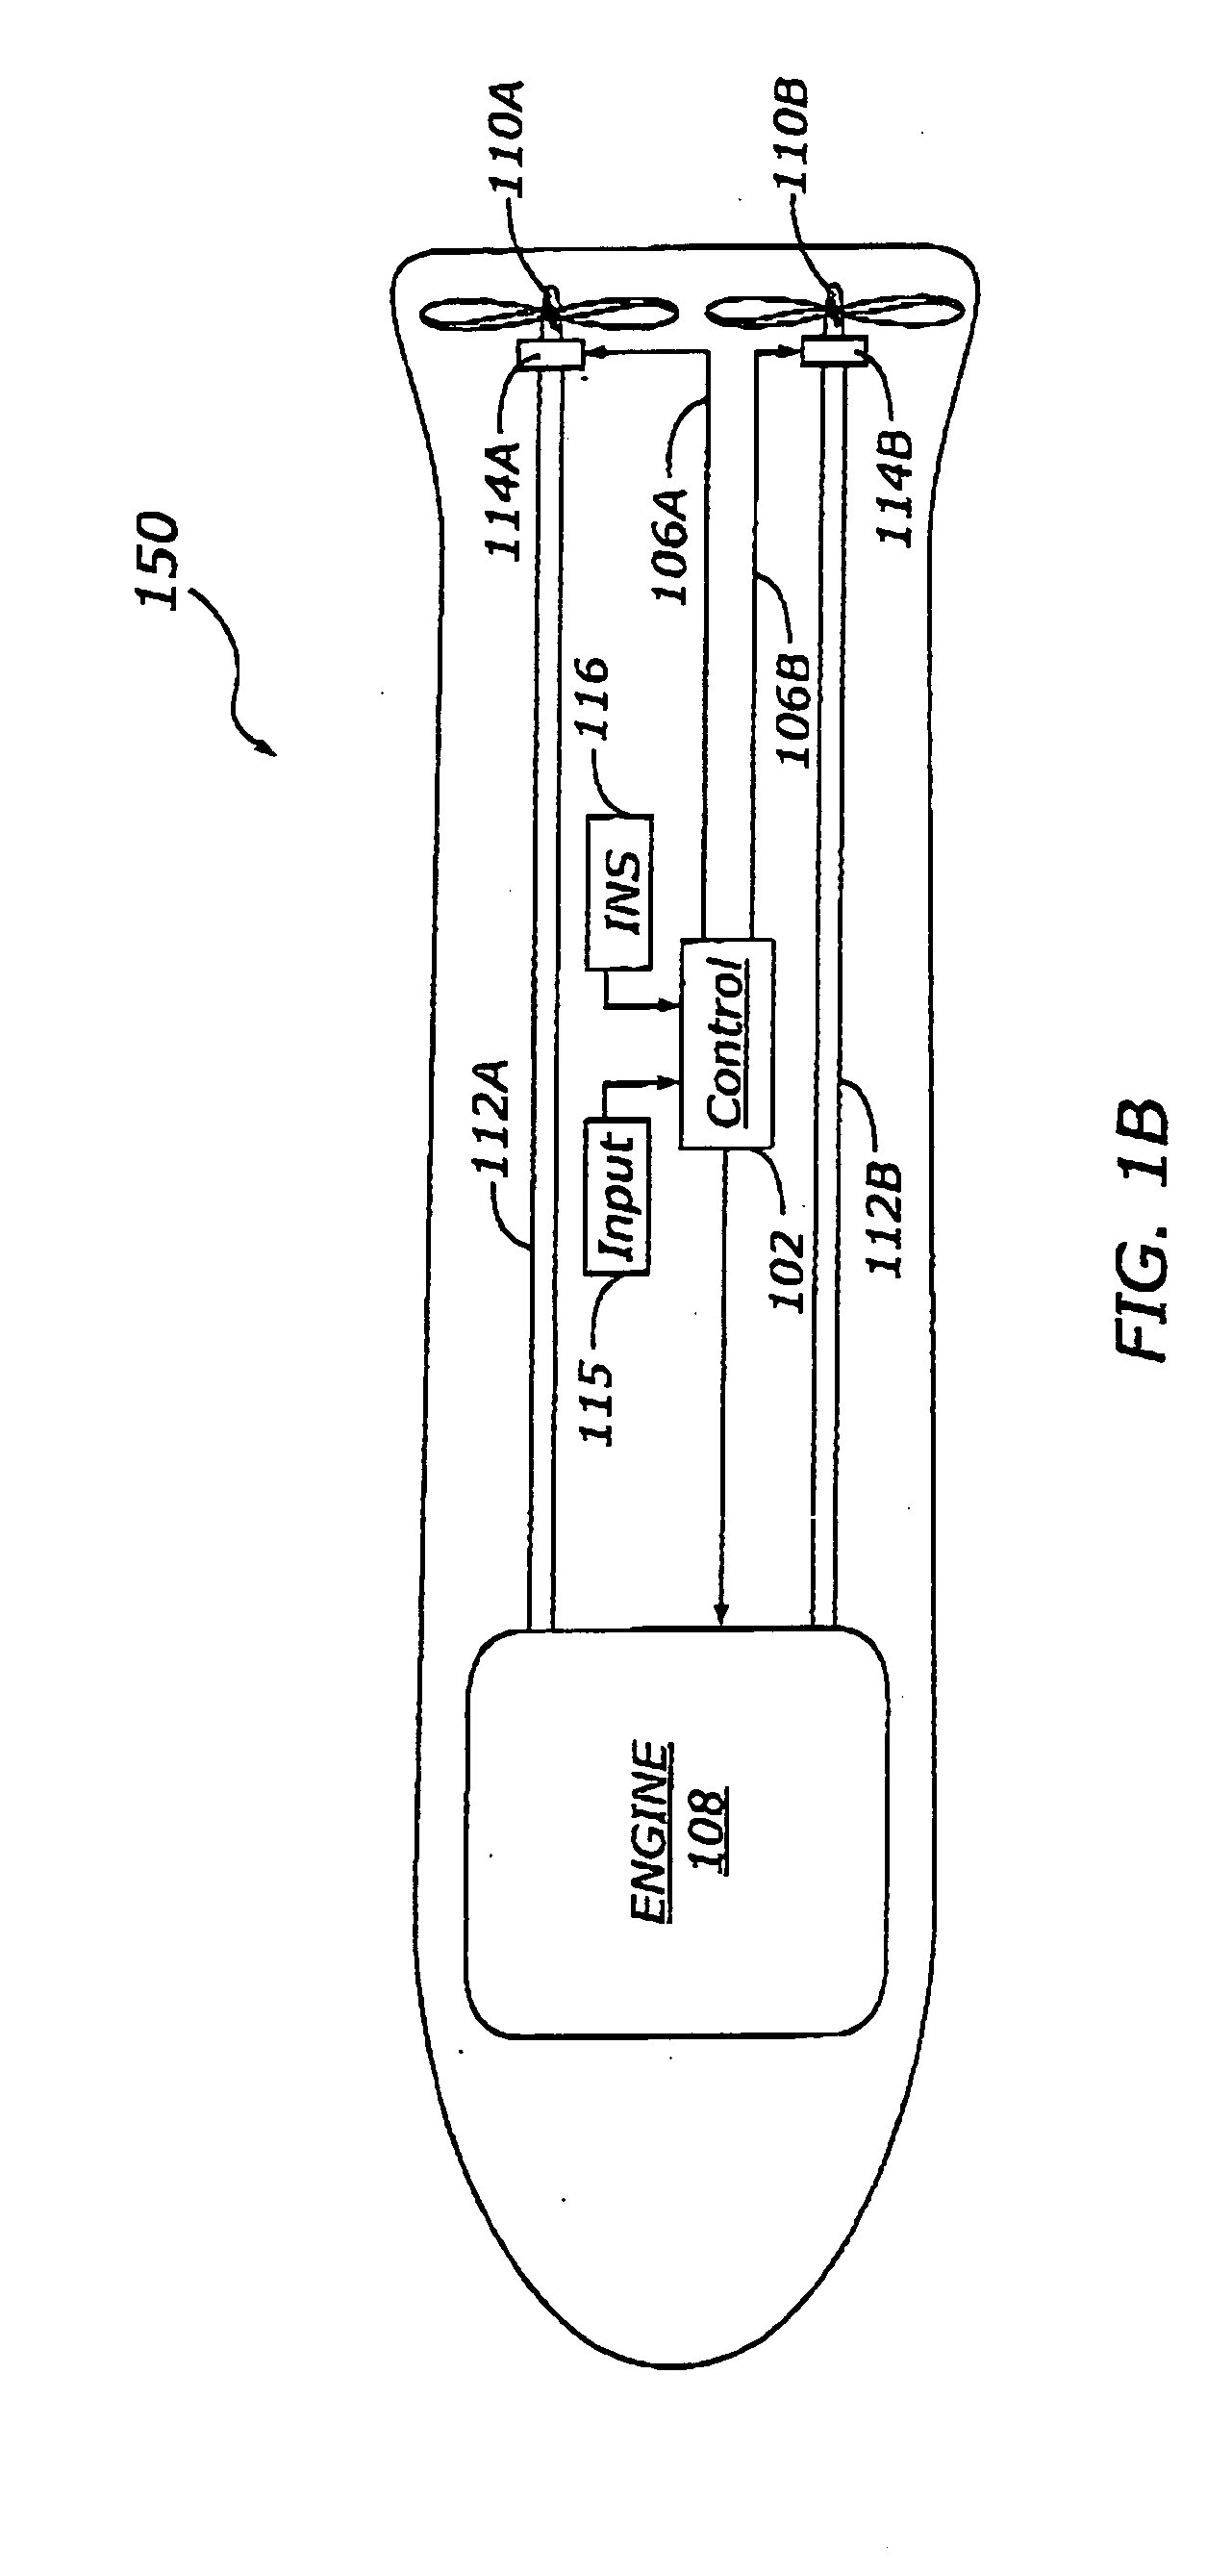 Method and apparatus for magnetic actuation of variable pitch impeller blades